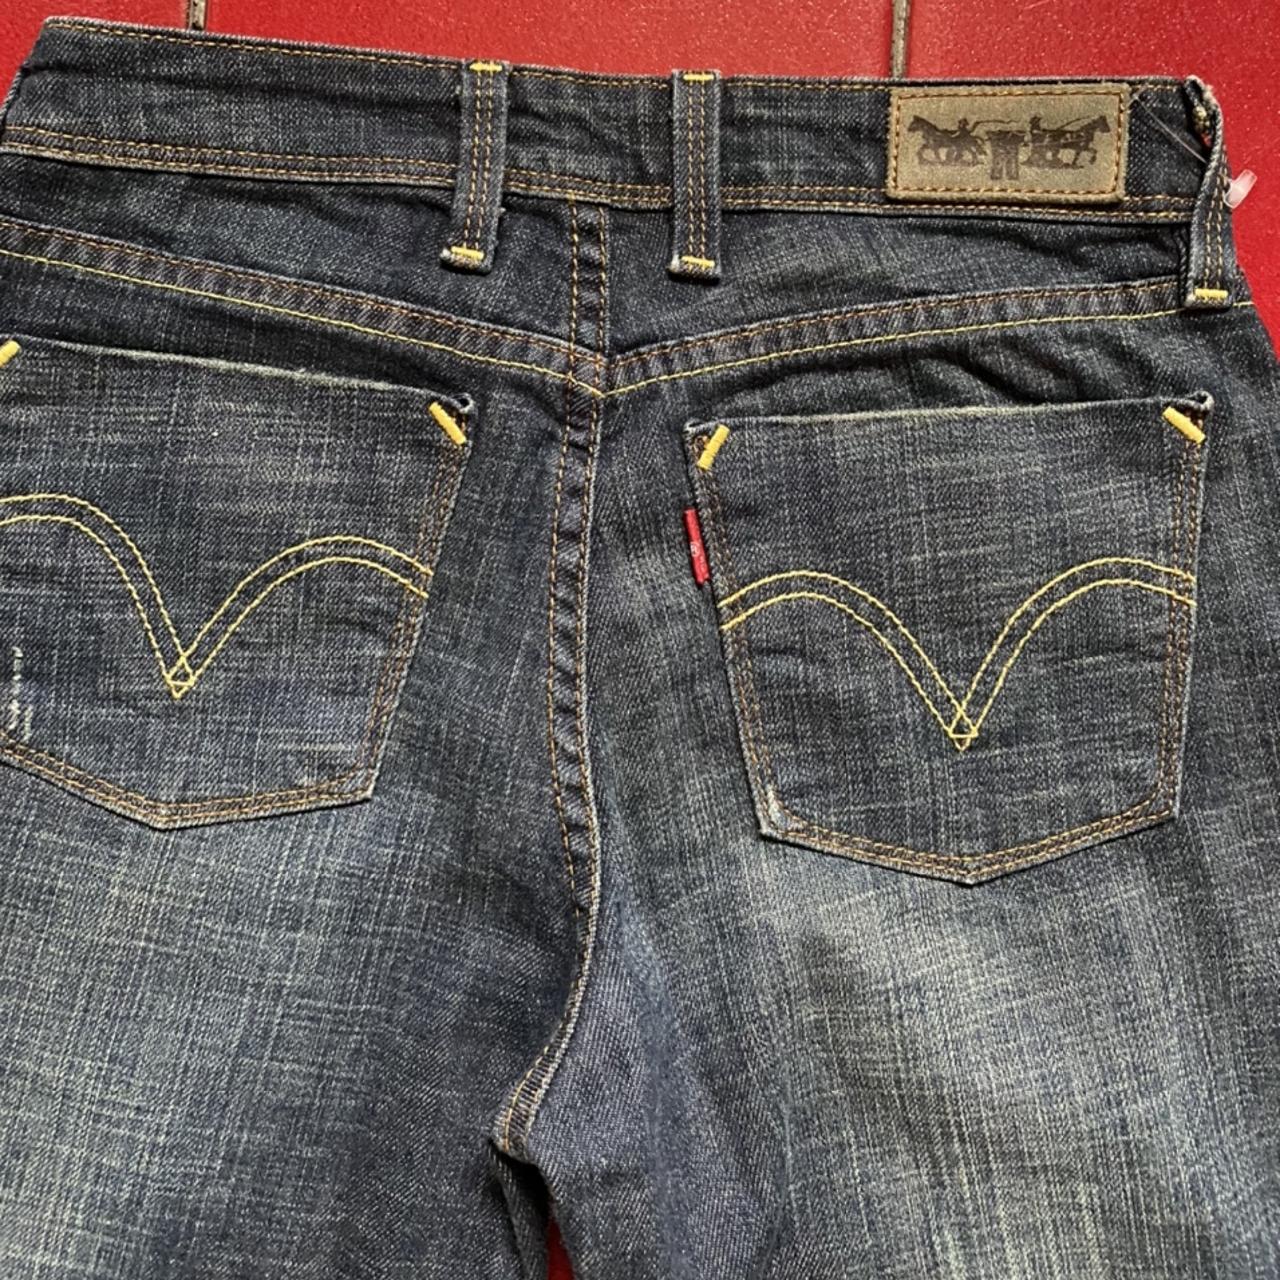 *NEED GONE ASAP* Levi’s 627 Straight Fit Jeans ... - Depop